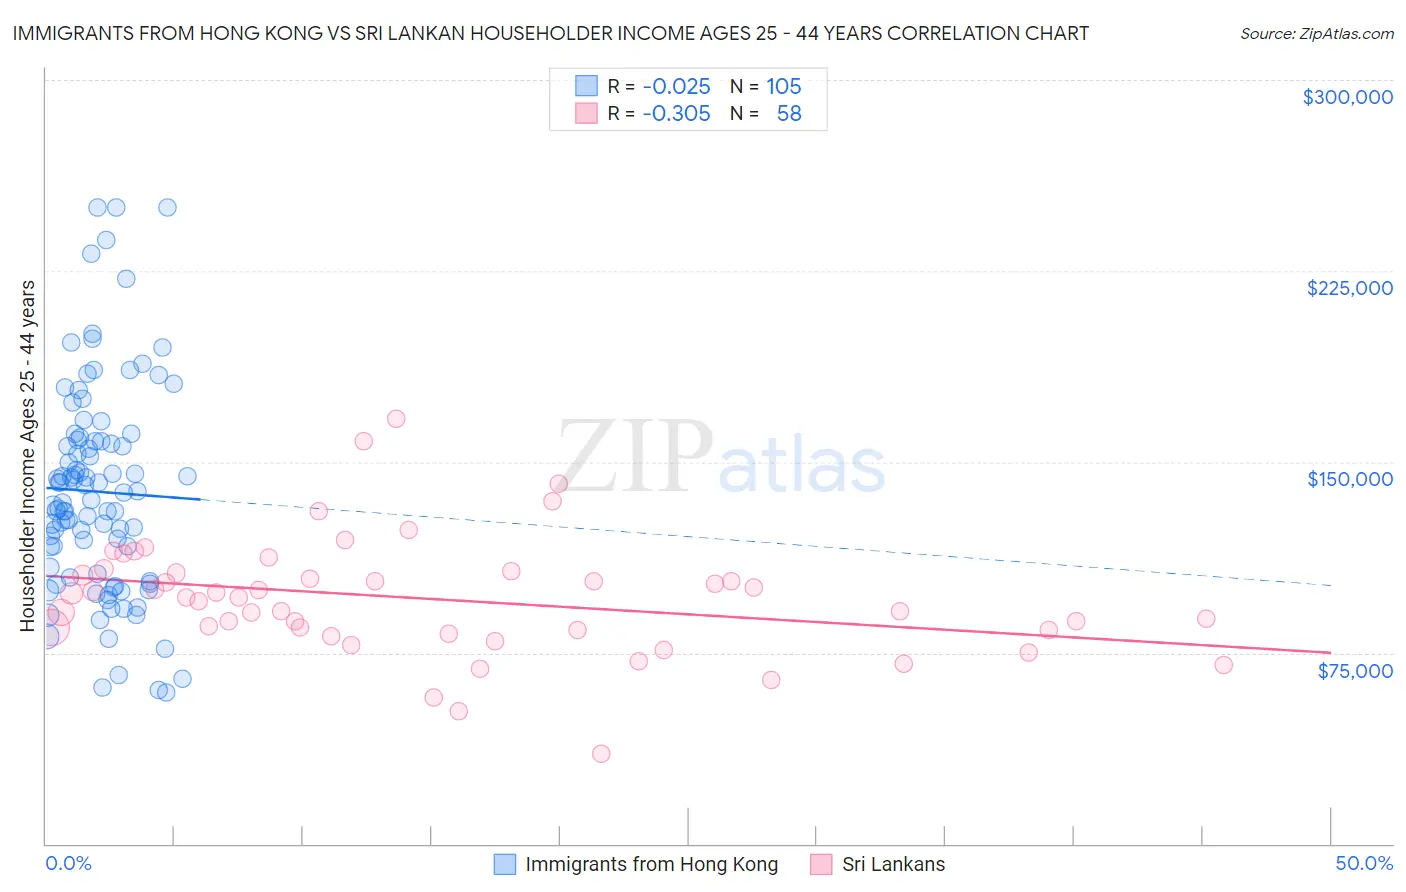 Immigrants from Hong Kong vs Sri Lankan Householder Income Ages 25 - 44 years